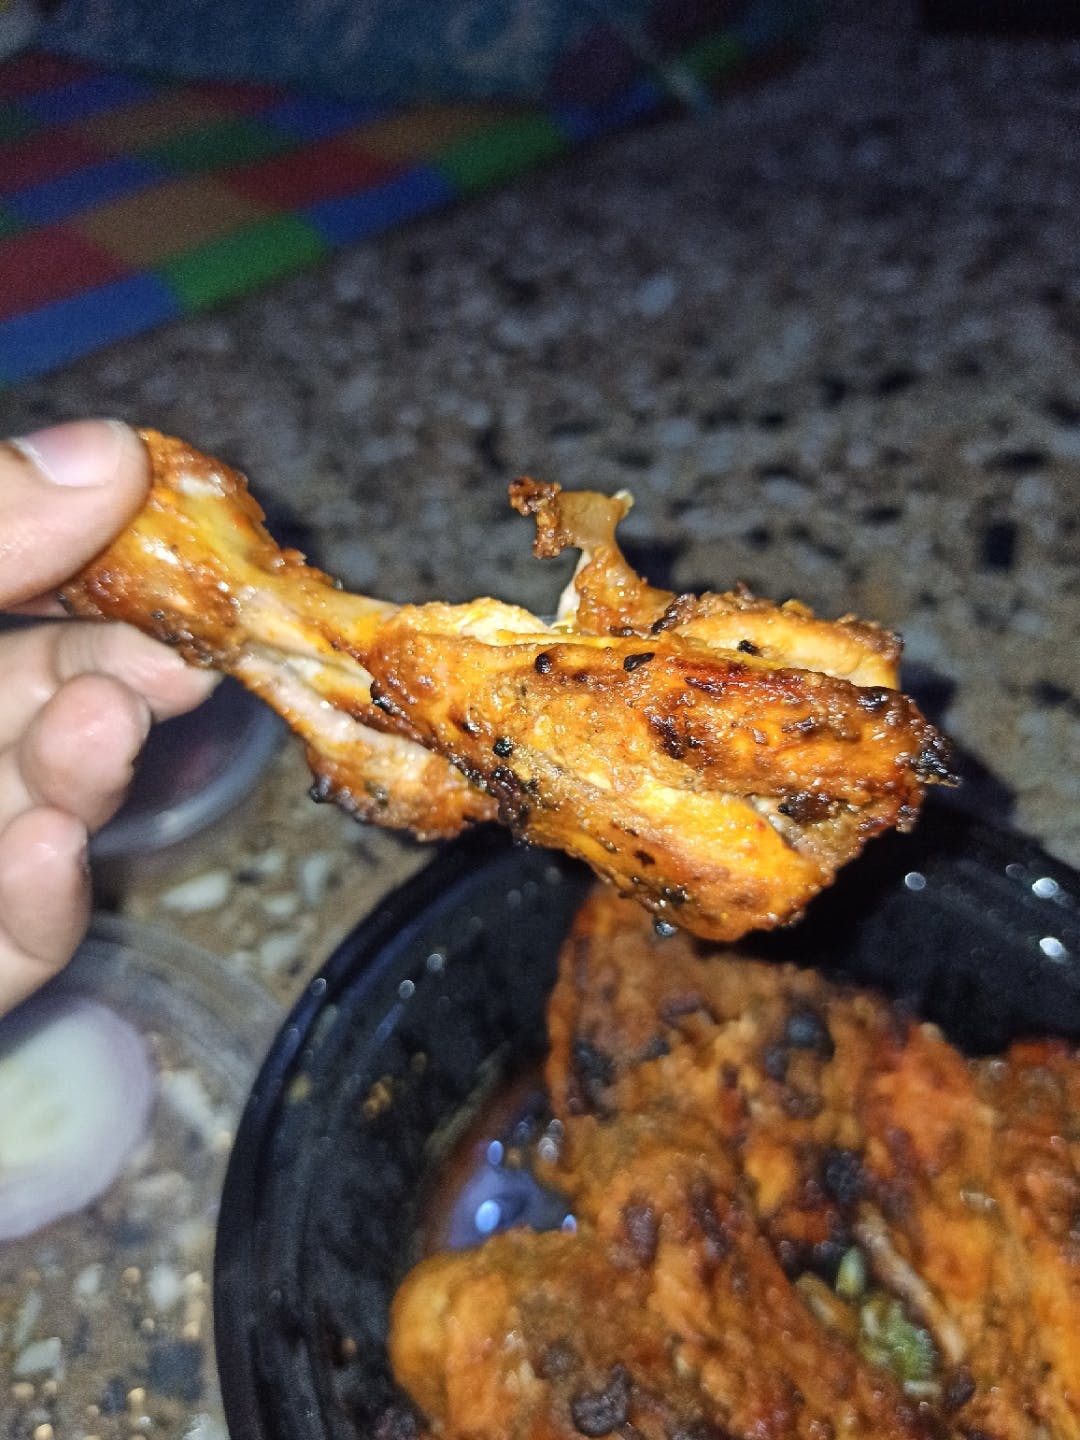 Fried food,Food,Dish,Chicken meat,Cuisine,Fried chicken,Meat,Tandoori chicken,Barbecue chicken,Chicken